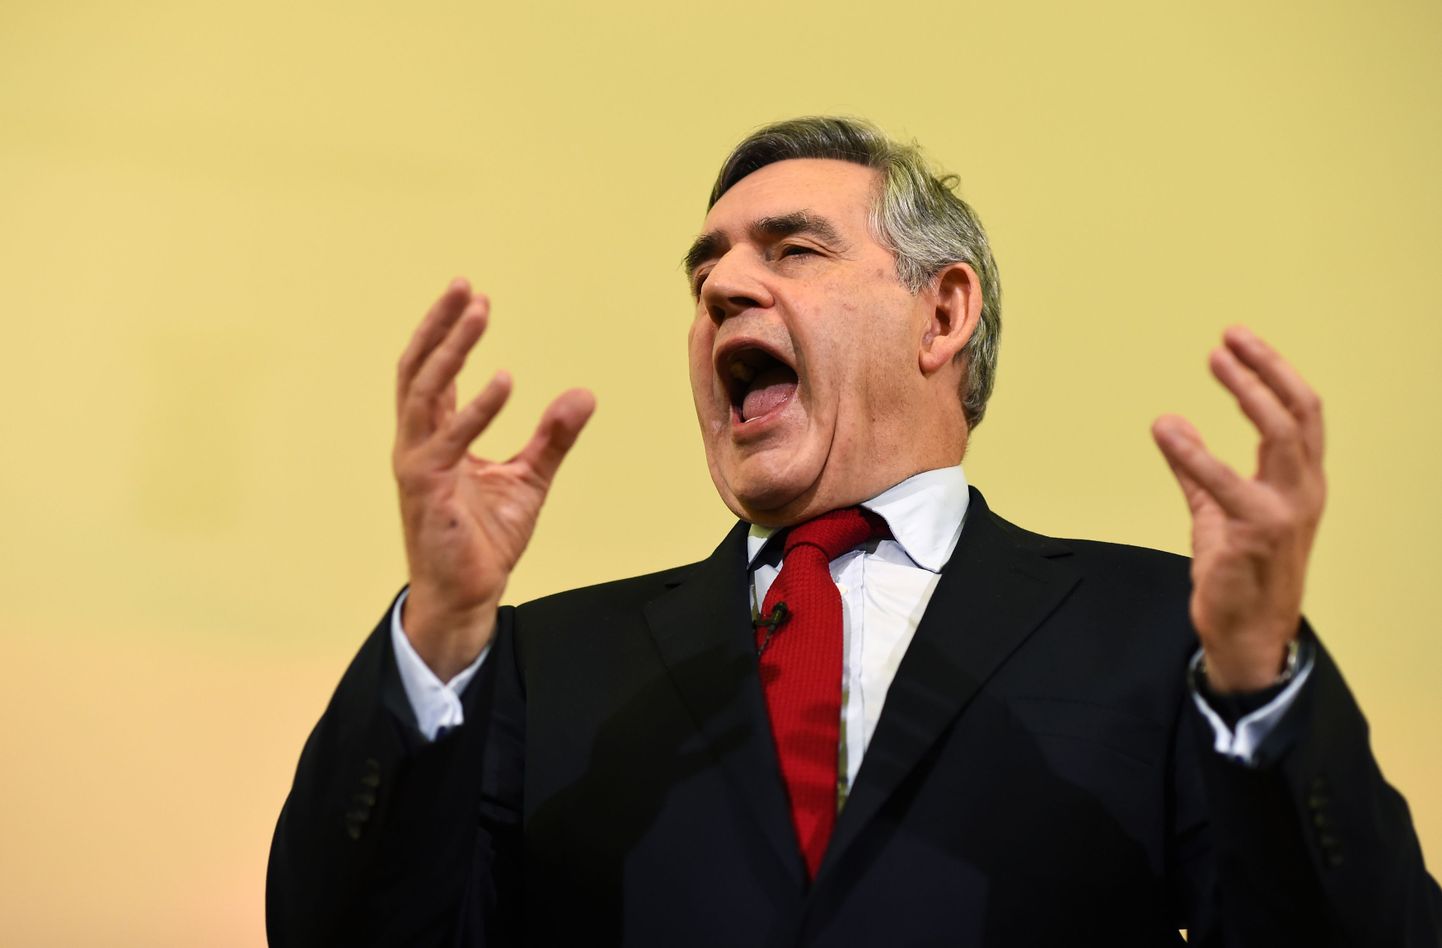 Britain's former Prime Minister Gordon Brown speaks at a campaign event in favour of the union in Clydebank, Scotland, in this September 16, 2014 file photo.   To match Special Report SCOTLAND-INDEPENDENCE/JOURNEY    REUTERS/Dylan Martinez/Files  (BRITAIN - Tags: POLITICS)